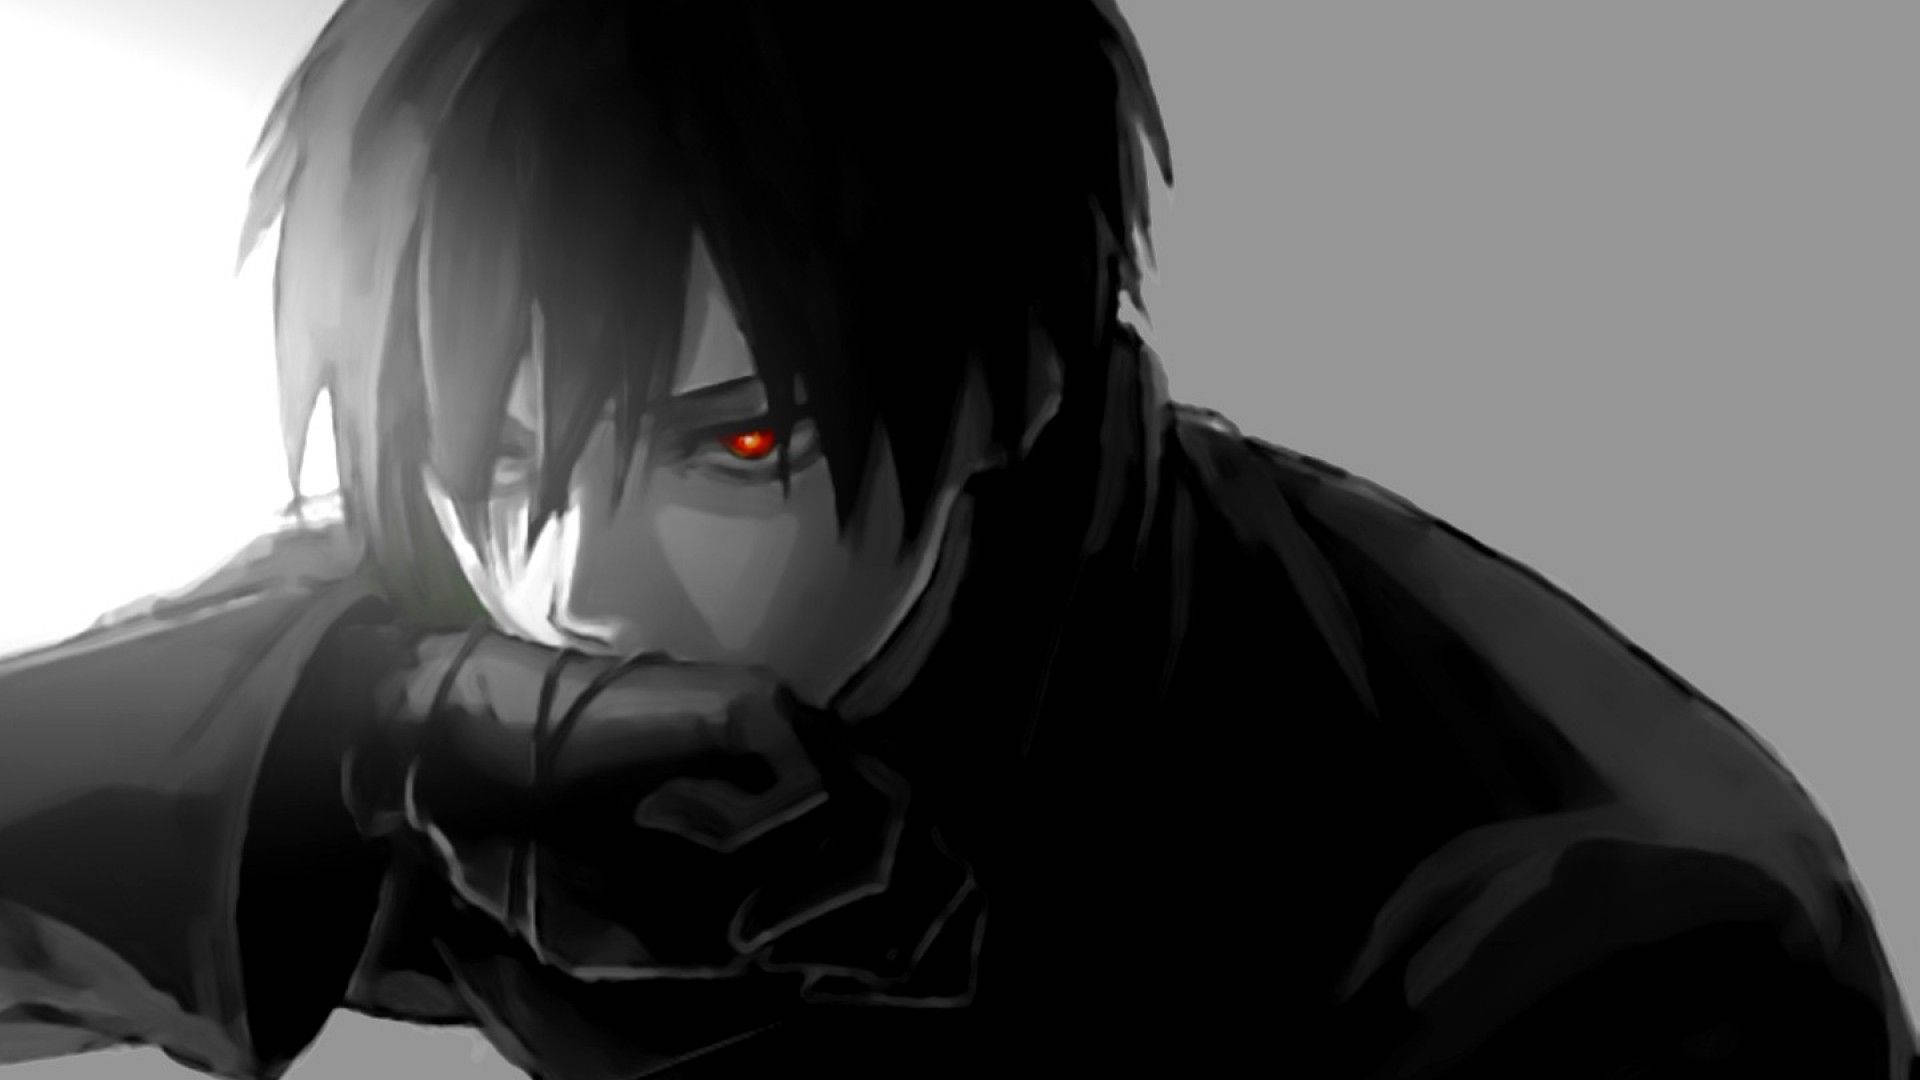 Trapped in heartache: anime boy struggles with emotional darkness. Wallpaper